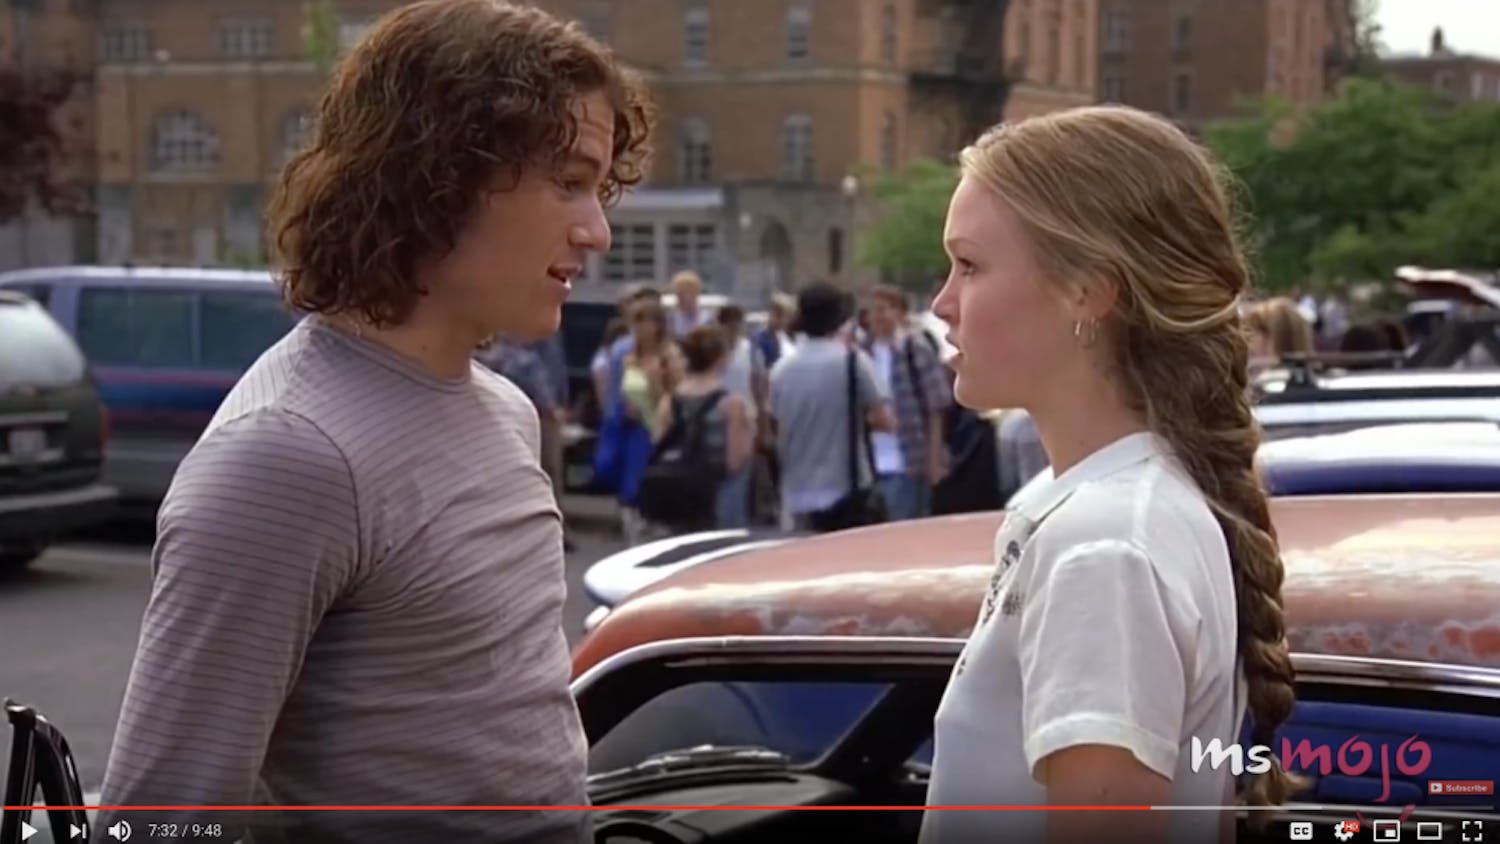 A scene from "10 Things I Hate About You."